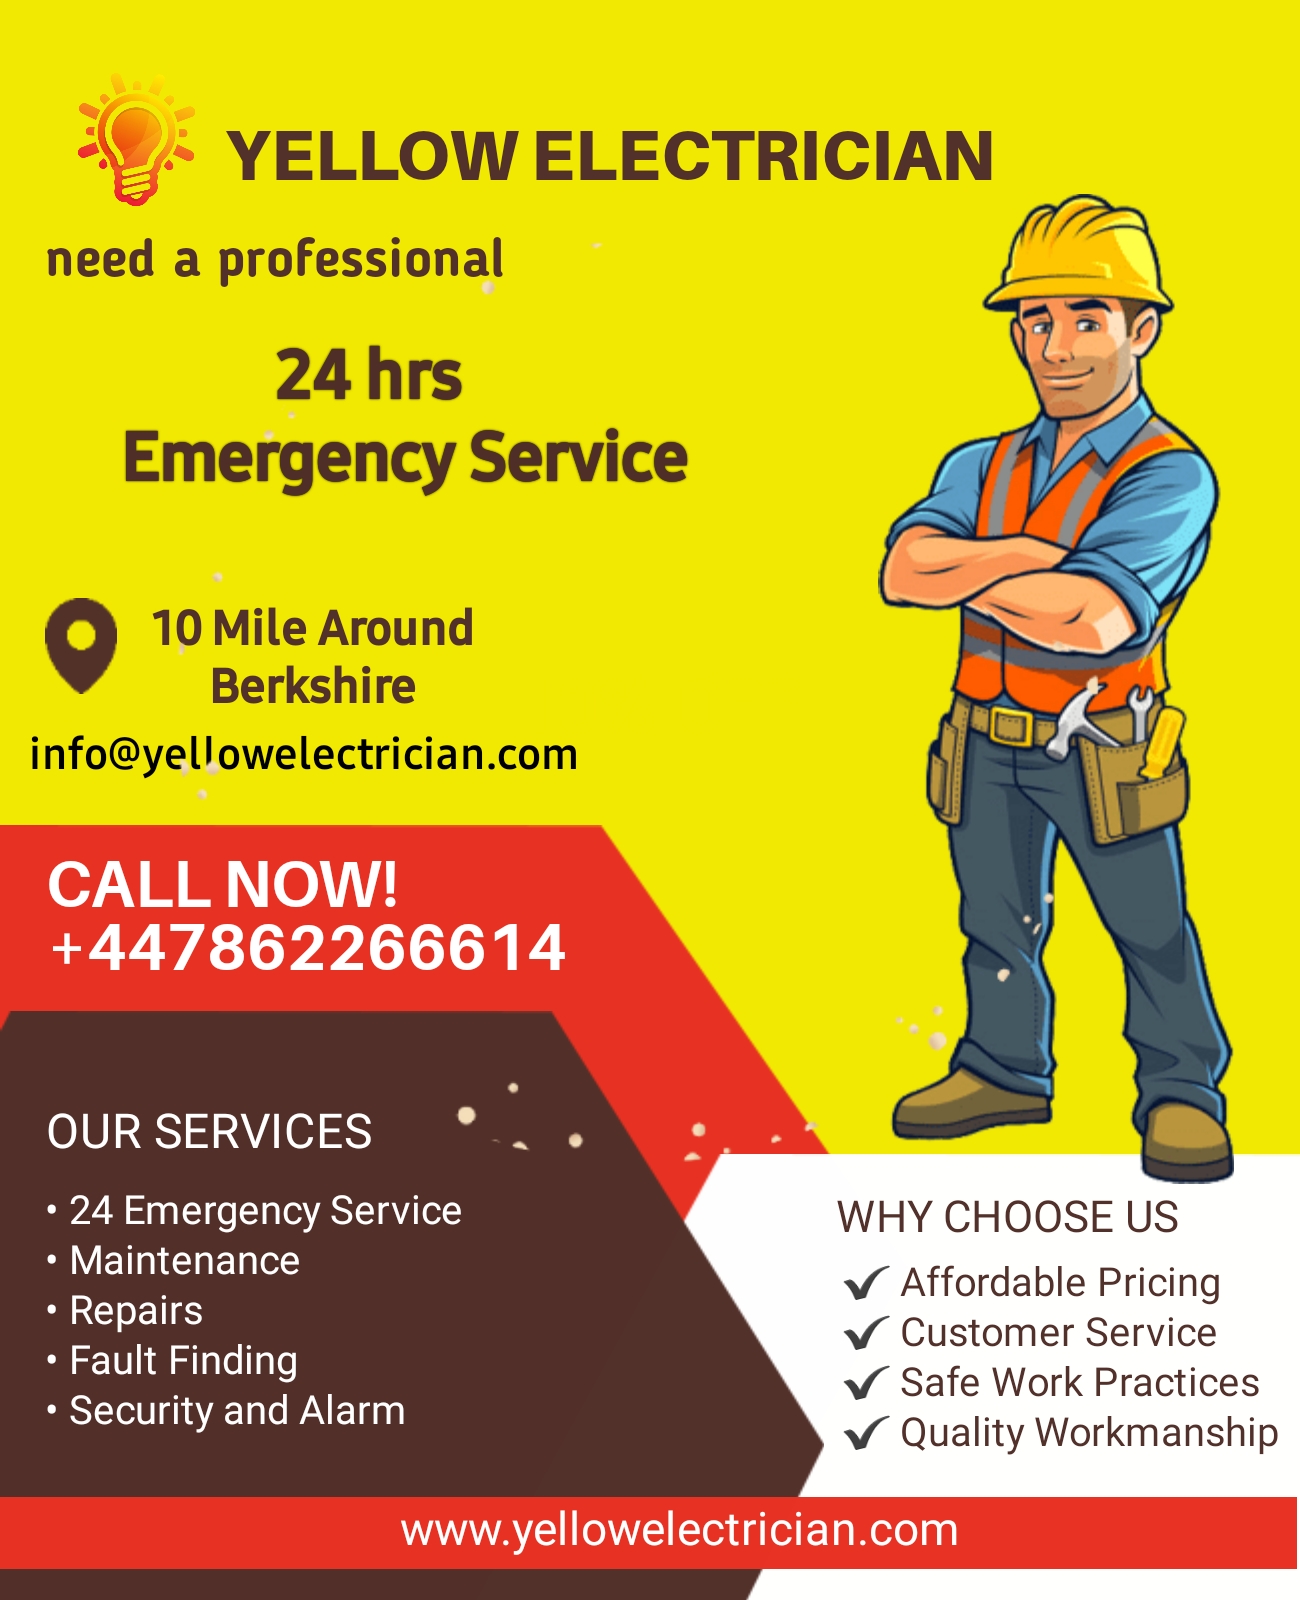 Yellow Electrician Launches Its 24 hr emergency Service In Berkshire UK